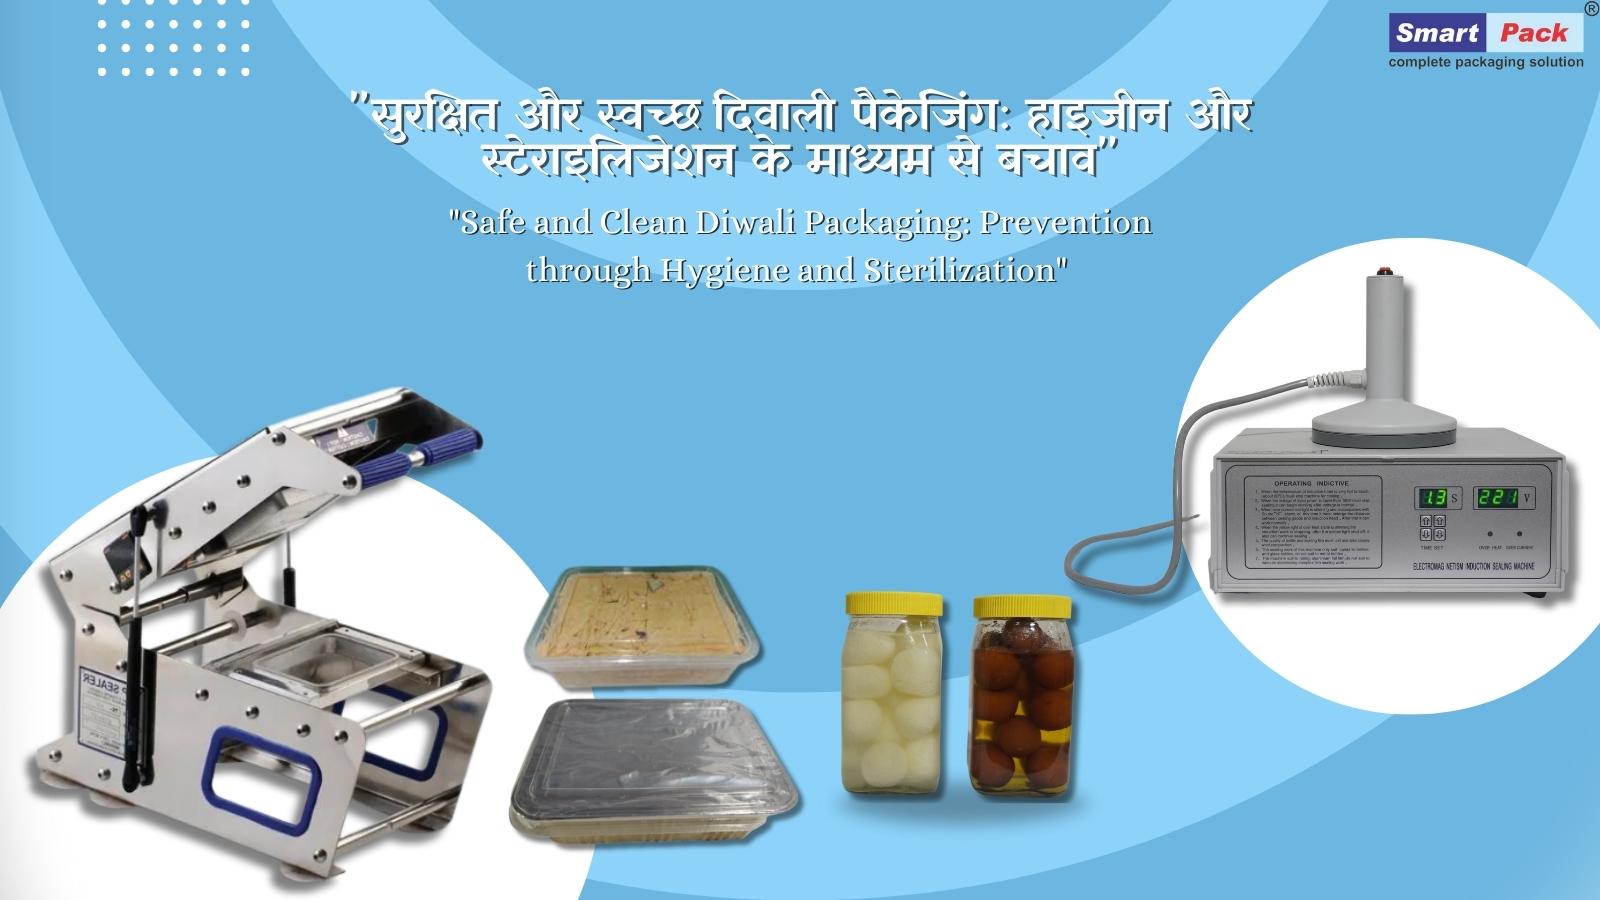 Safe and Clean Diwali Packaging: Prevention through Hygiene and Sterilization”